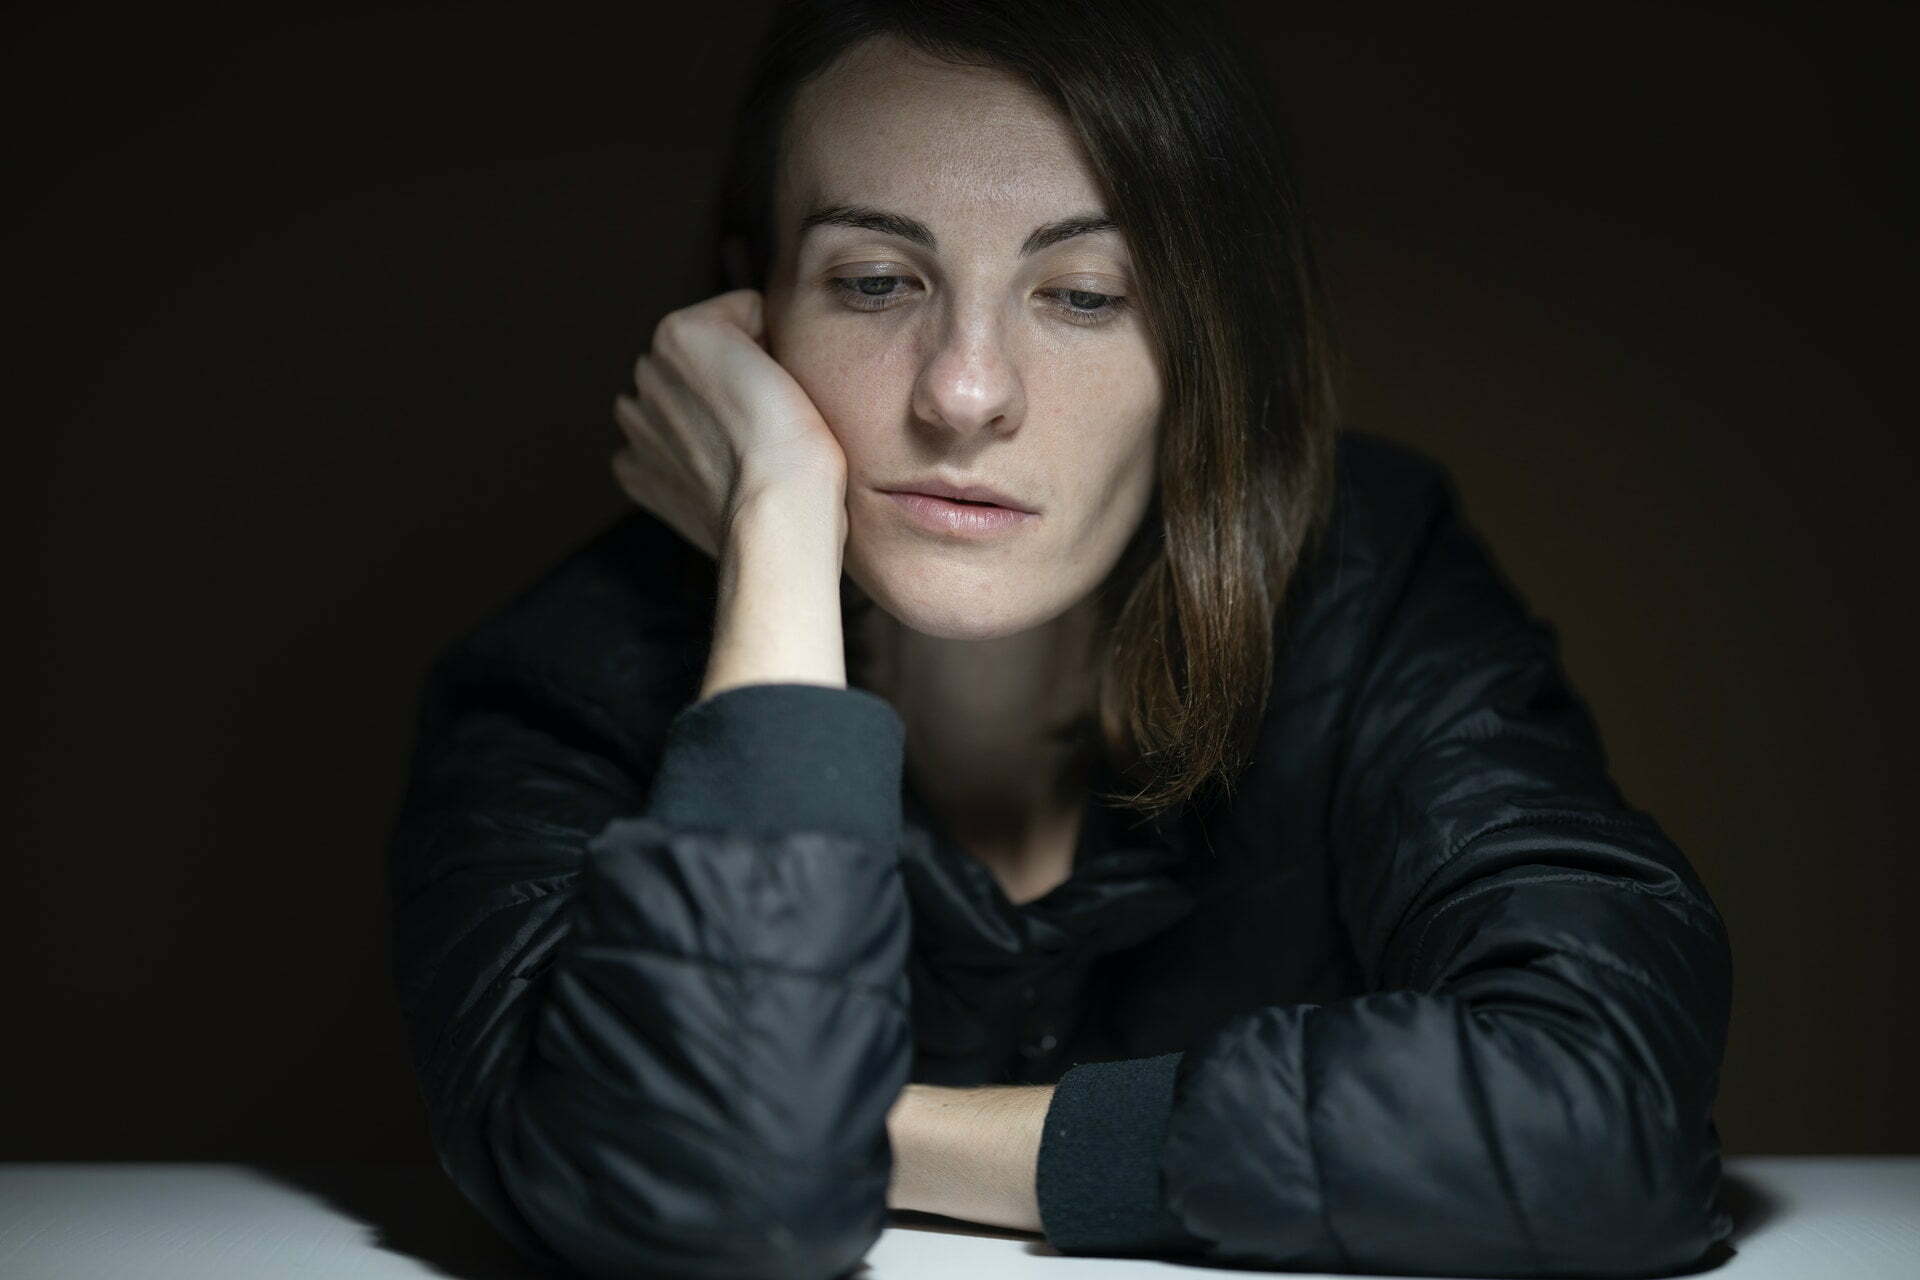 Young woman leaning on desk looking tired.